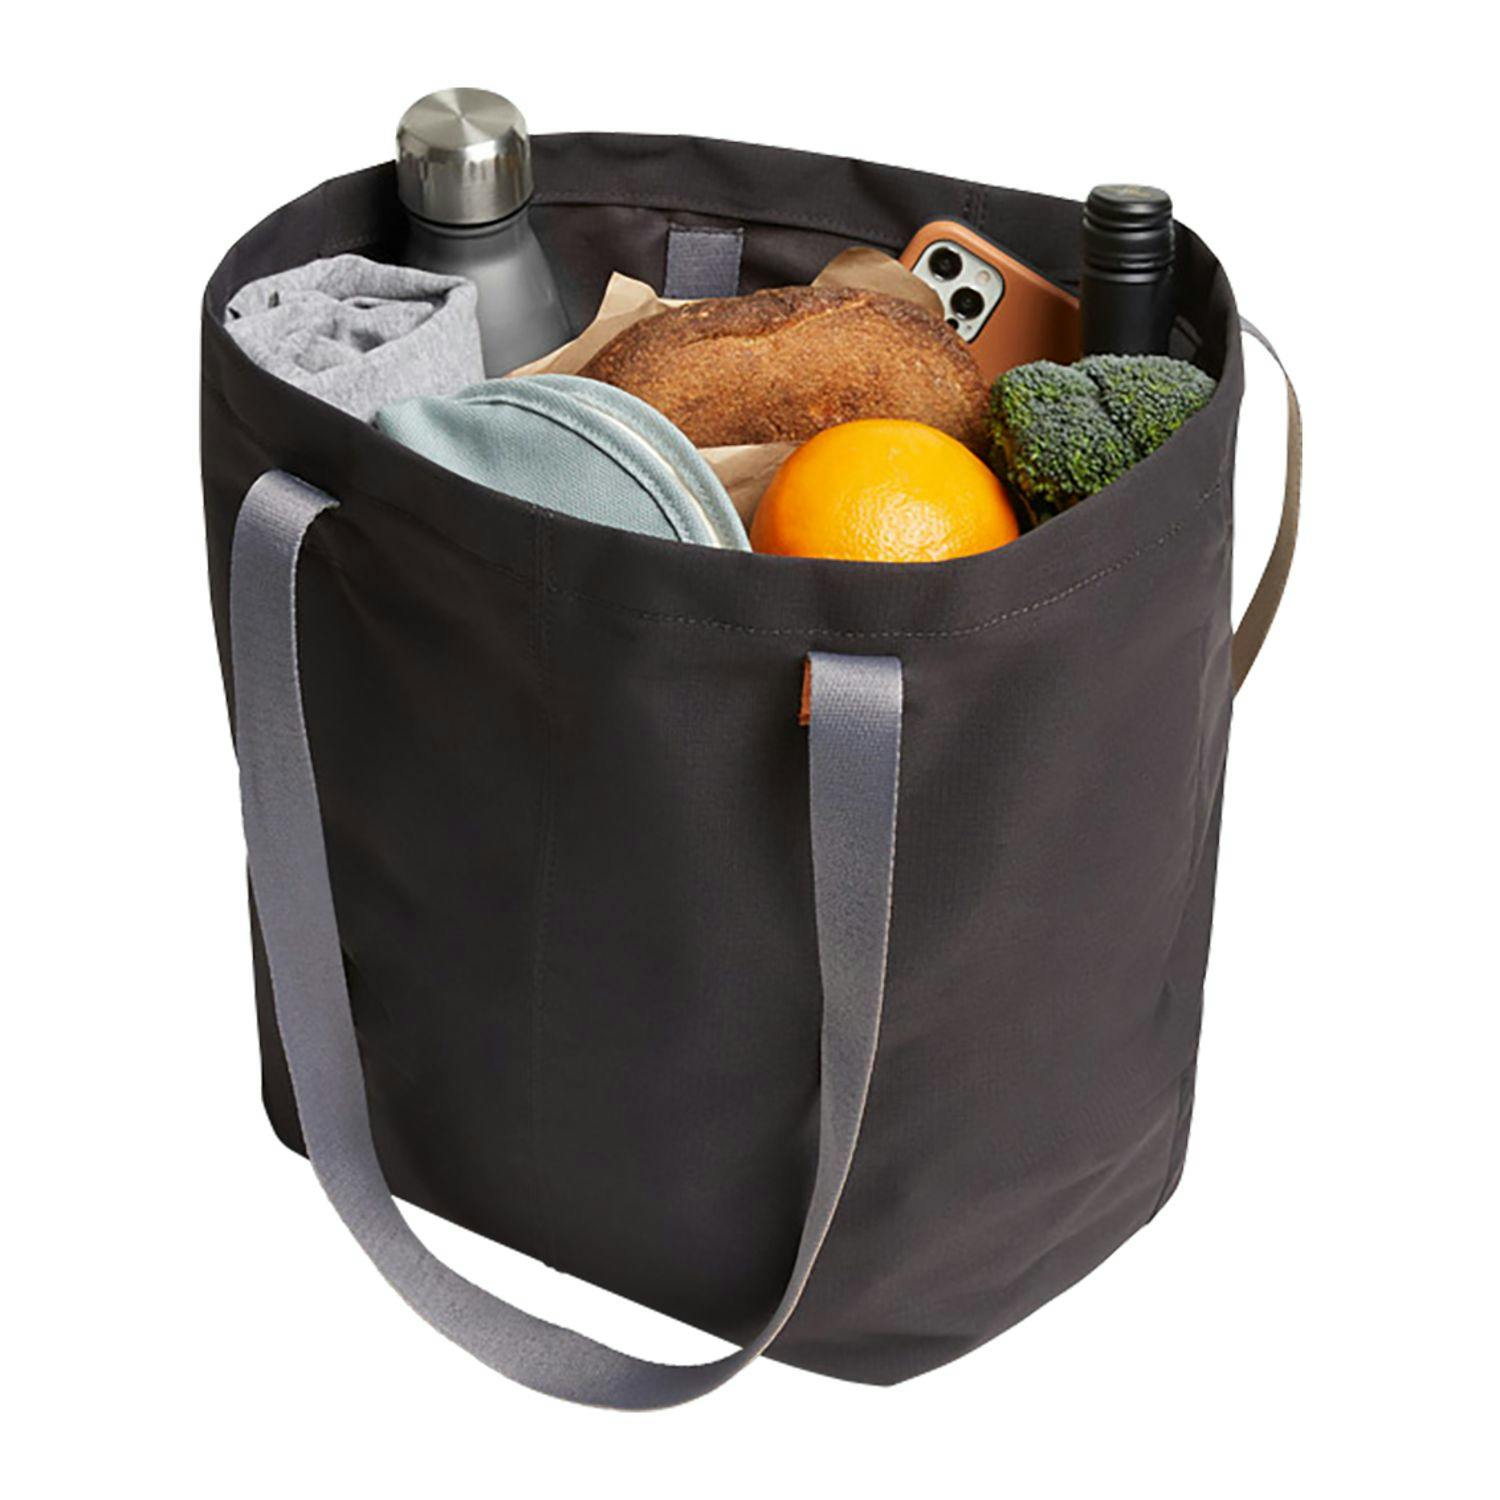 Bellroy Market Tote - additional Image 2